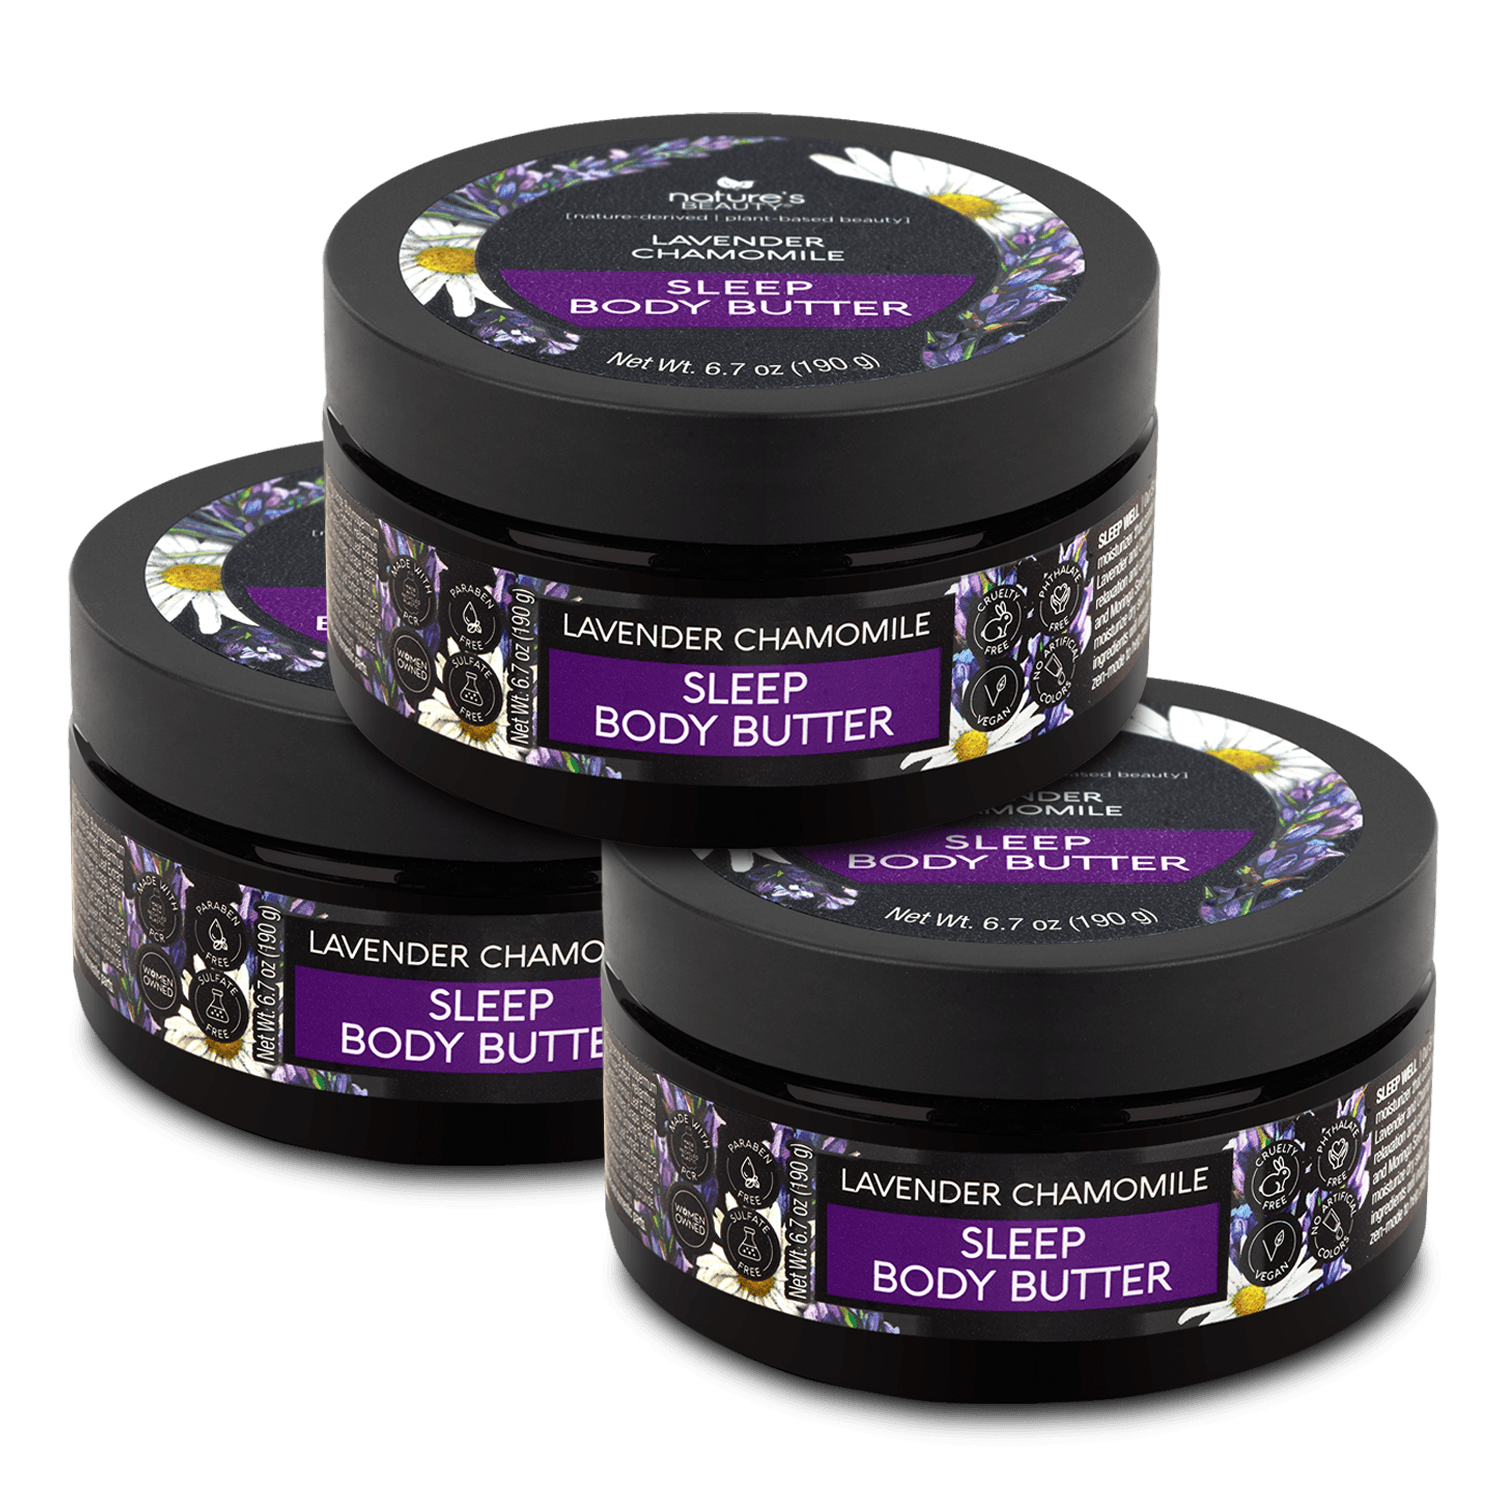 Lavender Chamomile Sleep Body Butter Nature's Beauty Body Care Buy 2 Get 1 Free 